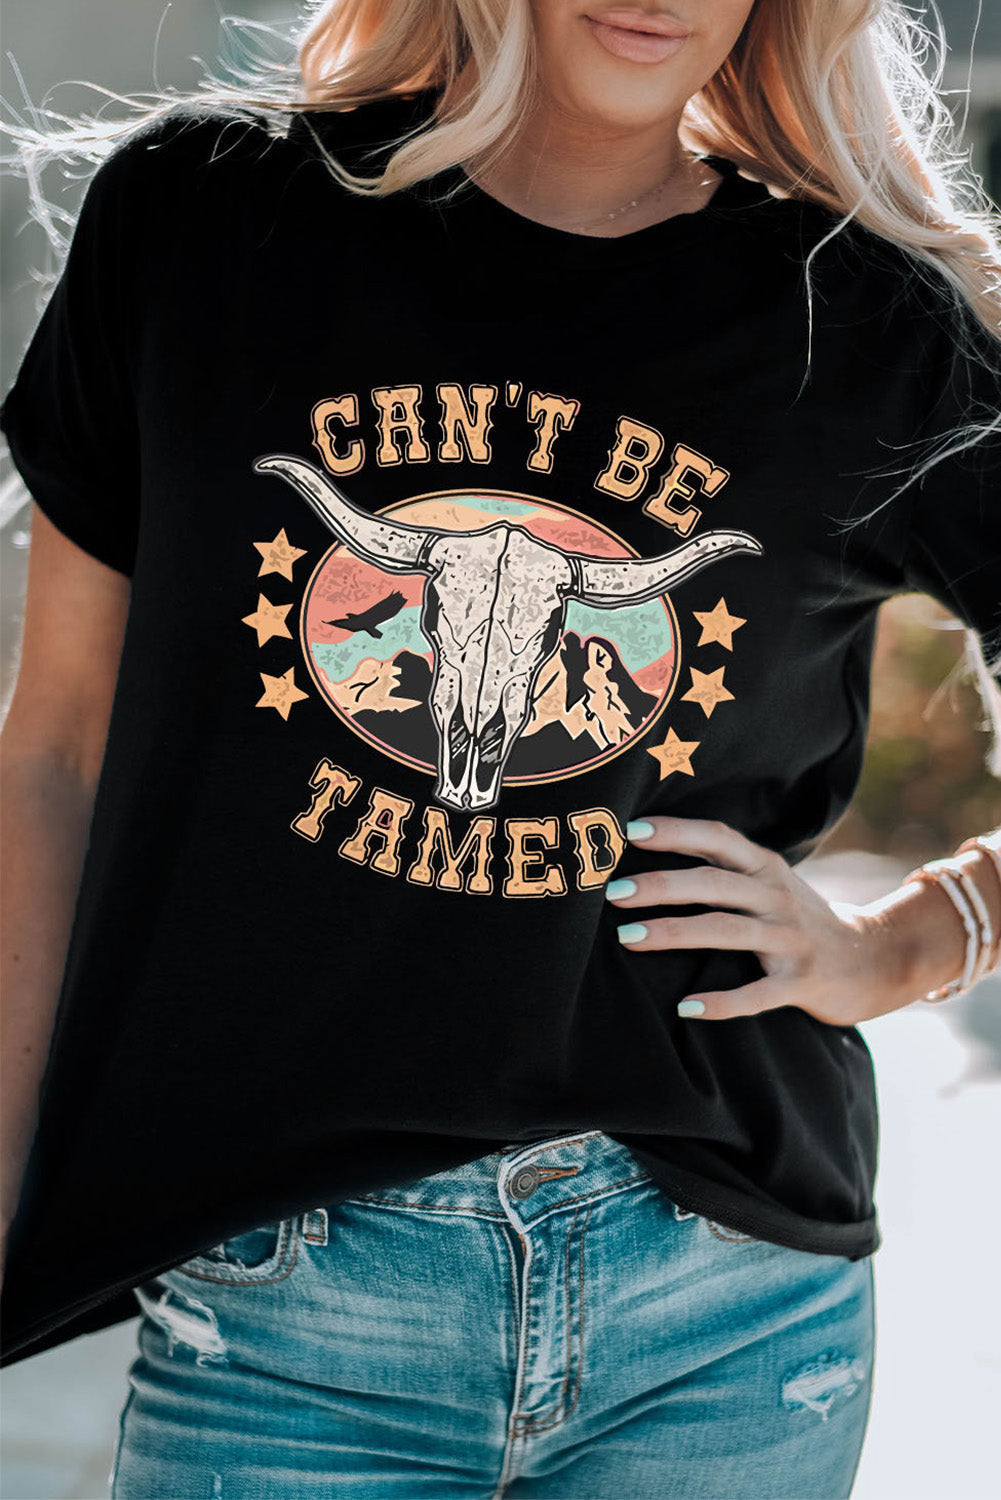 CAN'T BE TAMED Graphic Short Sleeve Tee